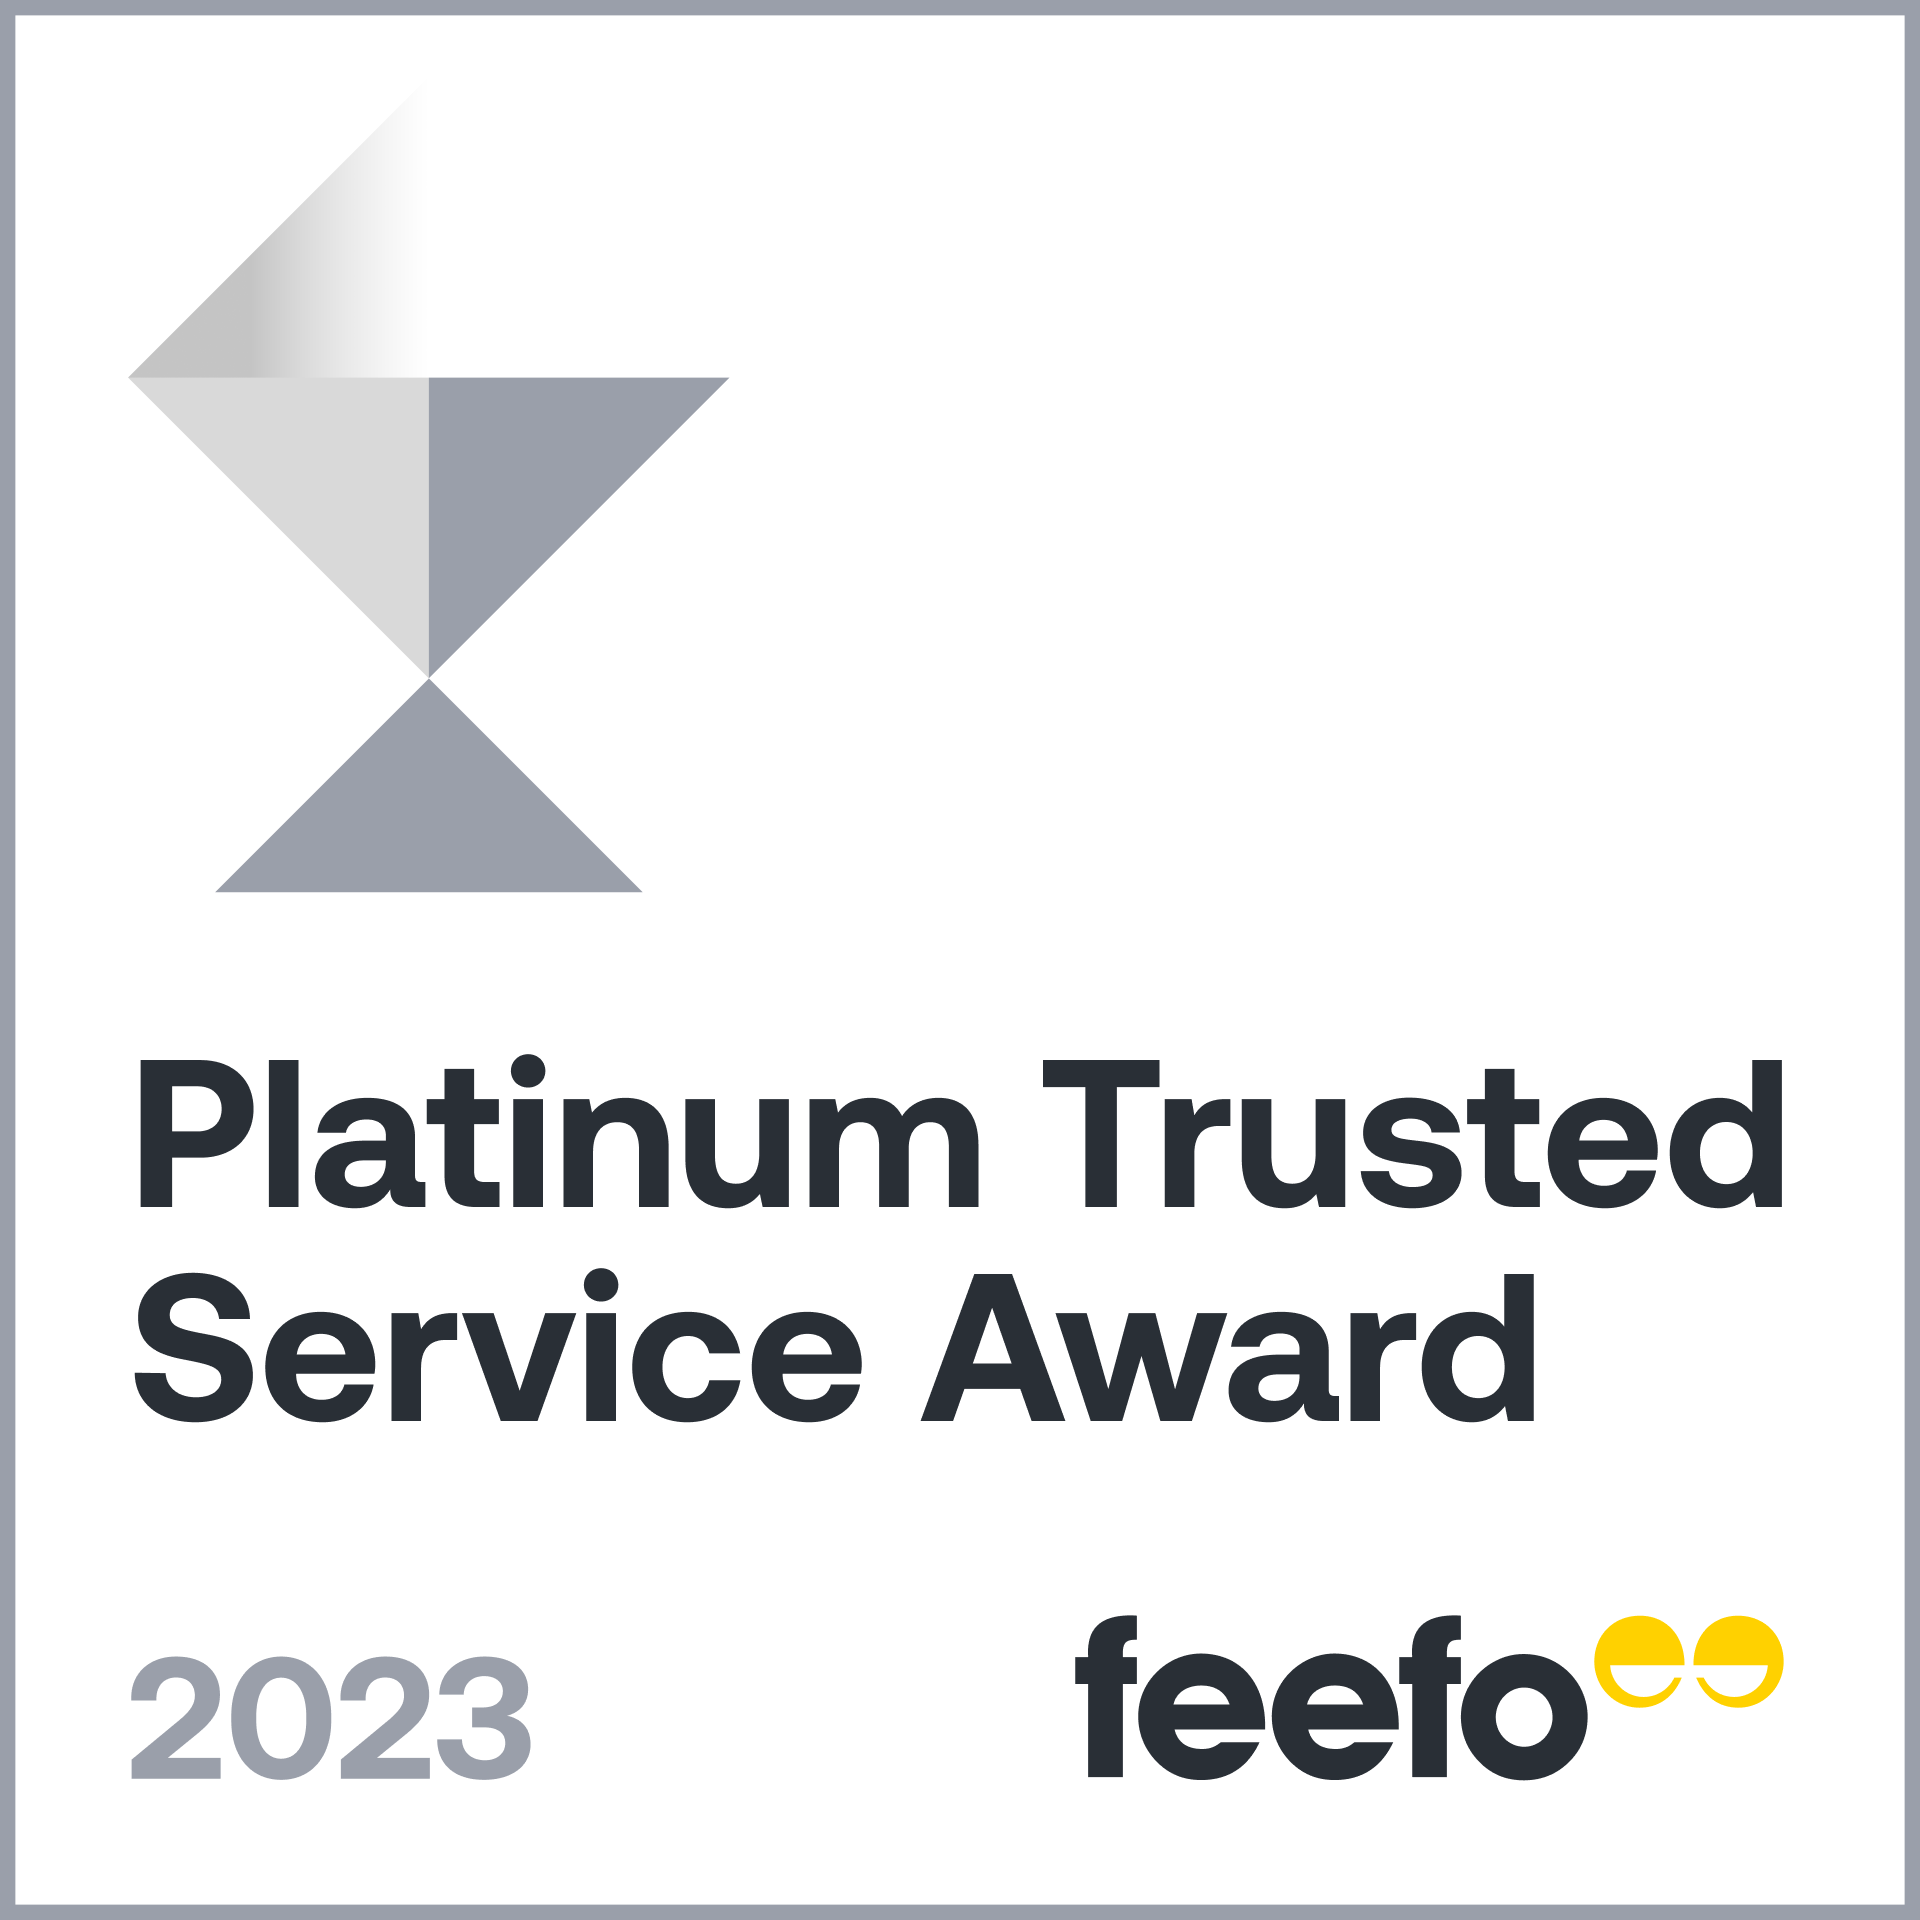 Our Third Platinum Trusted Service Award 